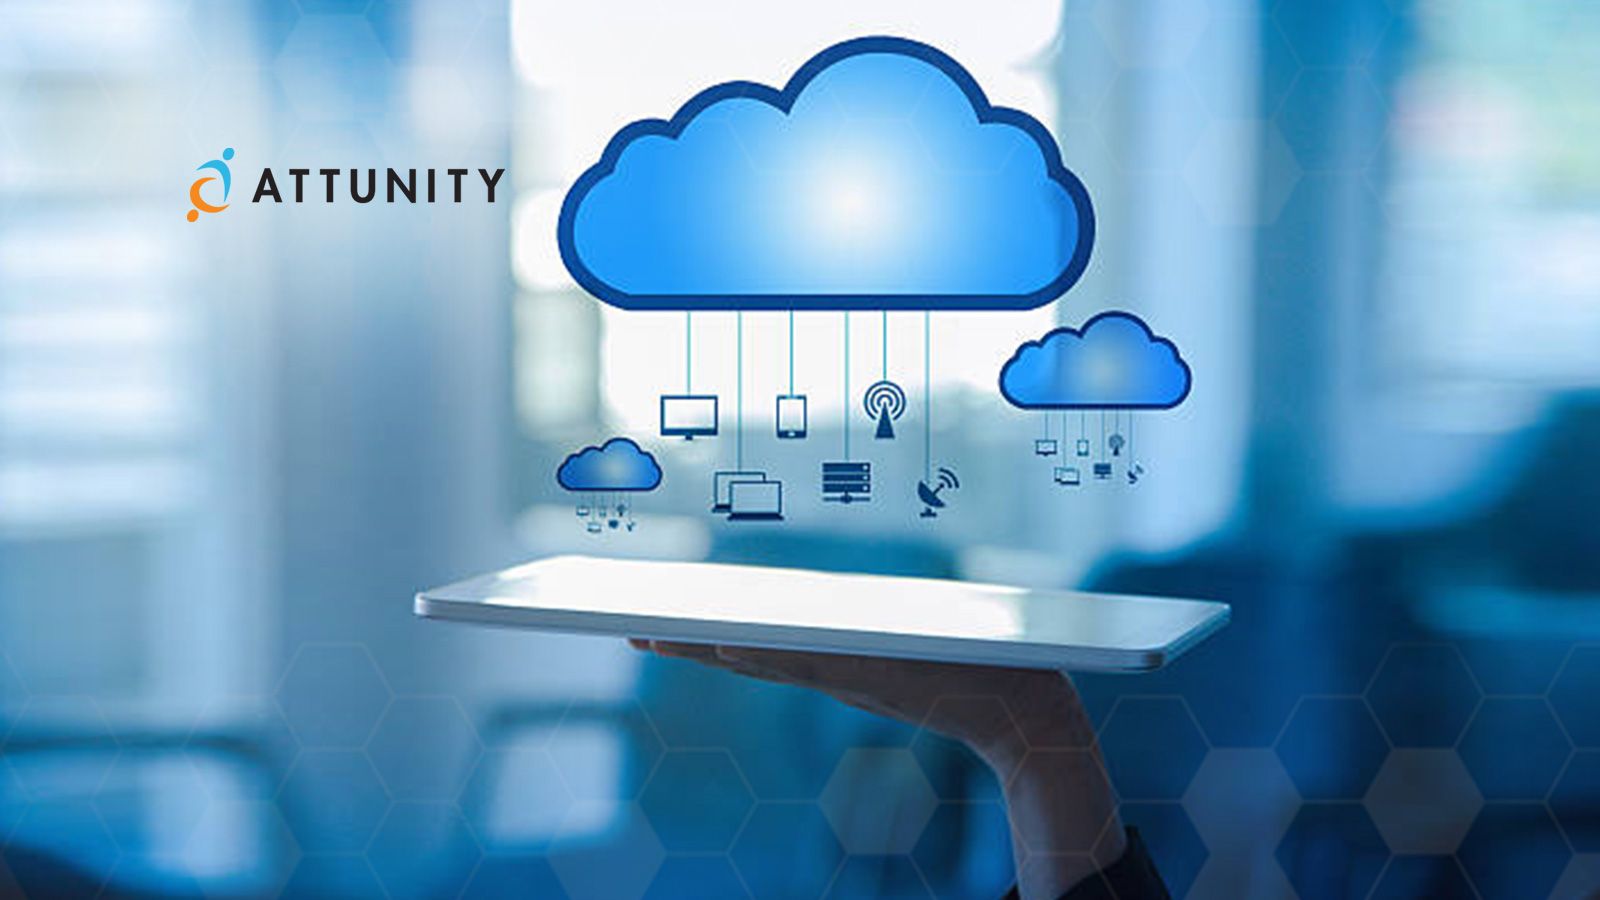 Free download Attunity Introduces Compose for Snowflake to Enable Agile Cloud [1600x900] for your Desktop, Mobile & Tablet. Explore DiscoverOrg Wallpaper. DiscoverOrg Wallpaper